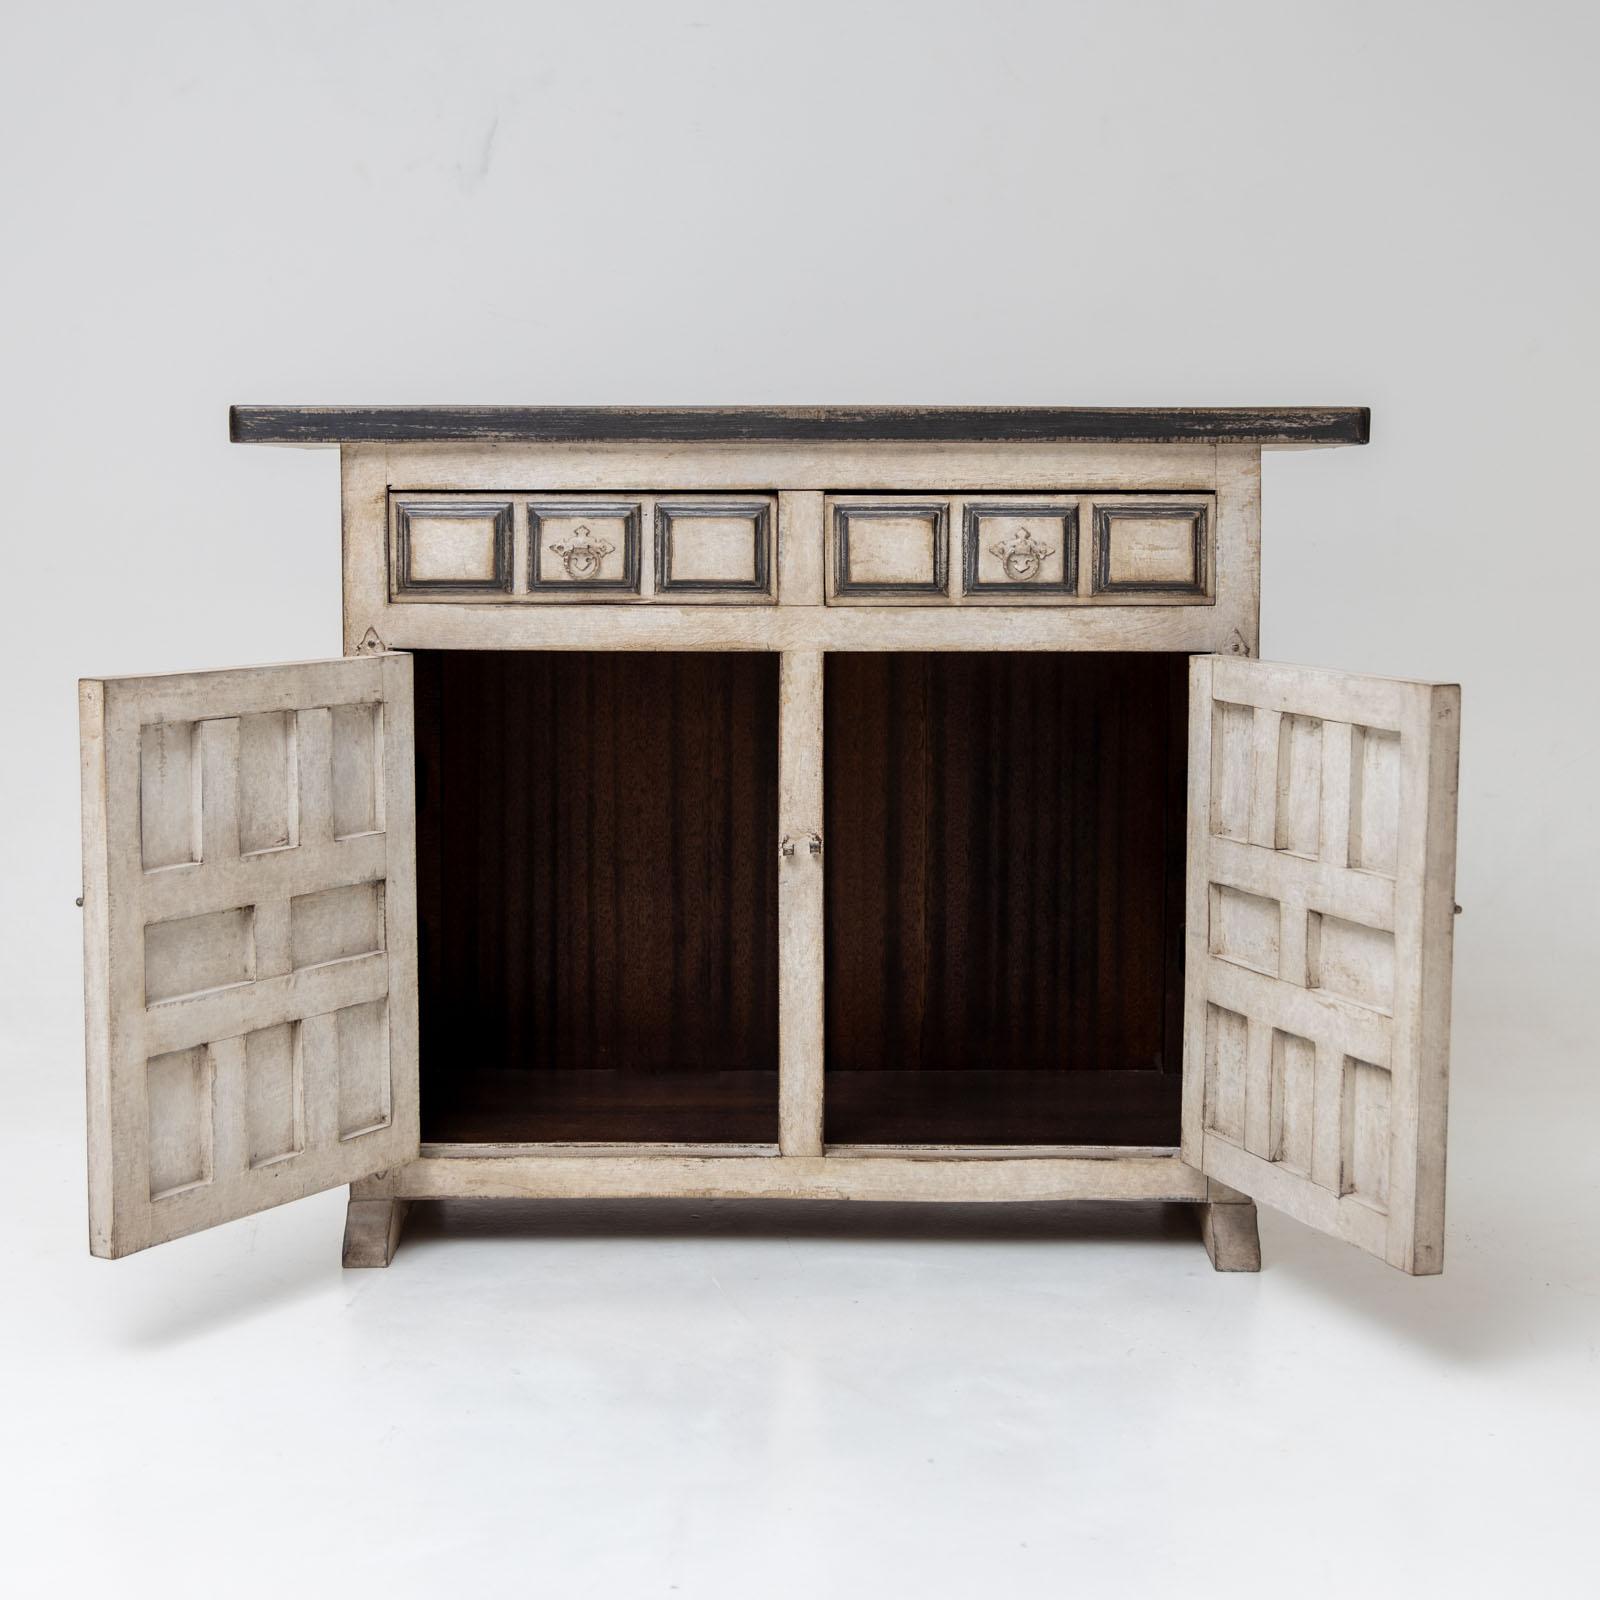 Small painted sideboard with two doors and coffered sides and front. There are two additional drawers above the doors. The creamy white painting with gray accents is new and has an antique patina.